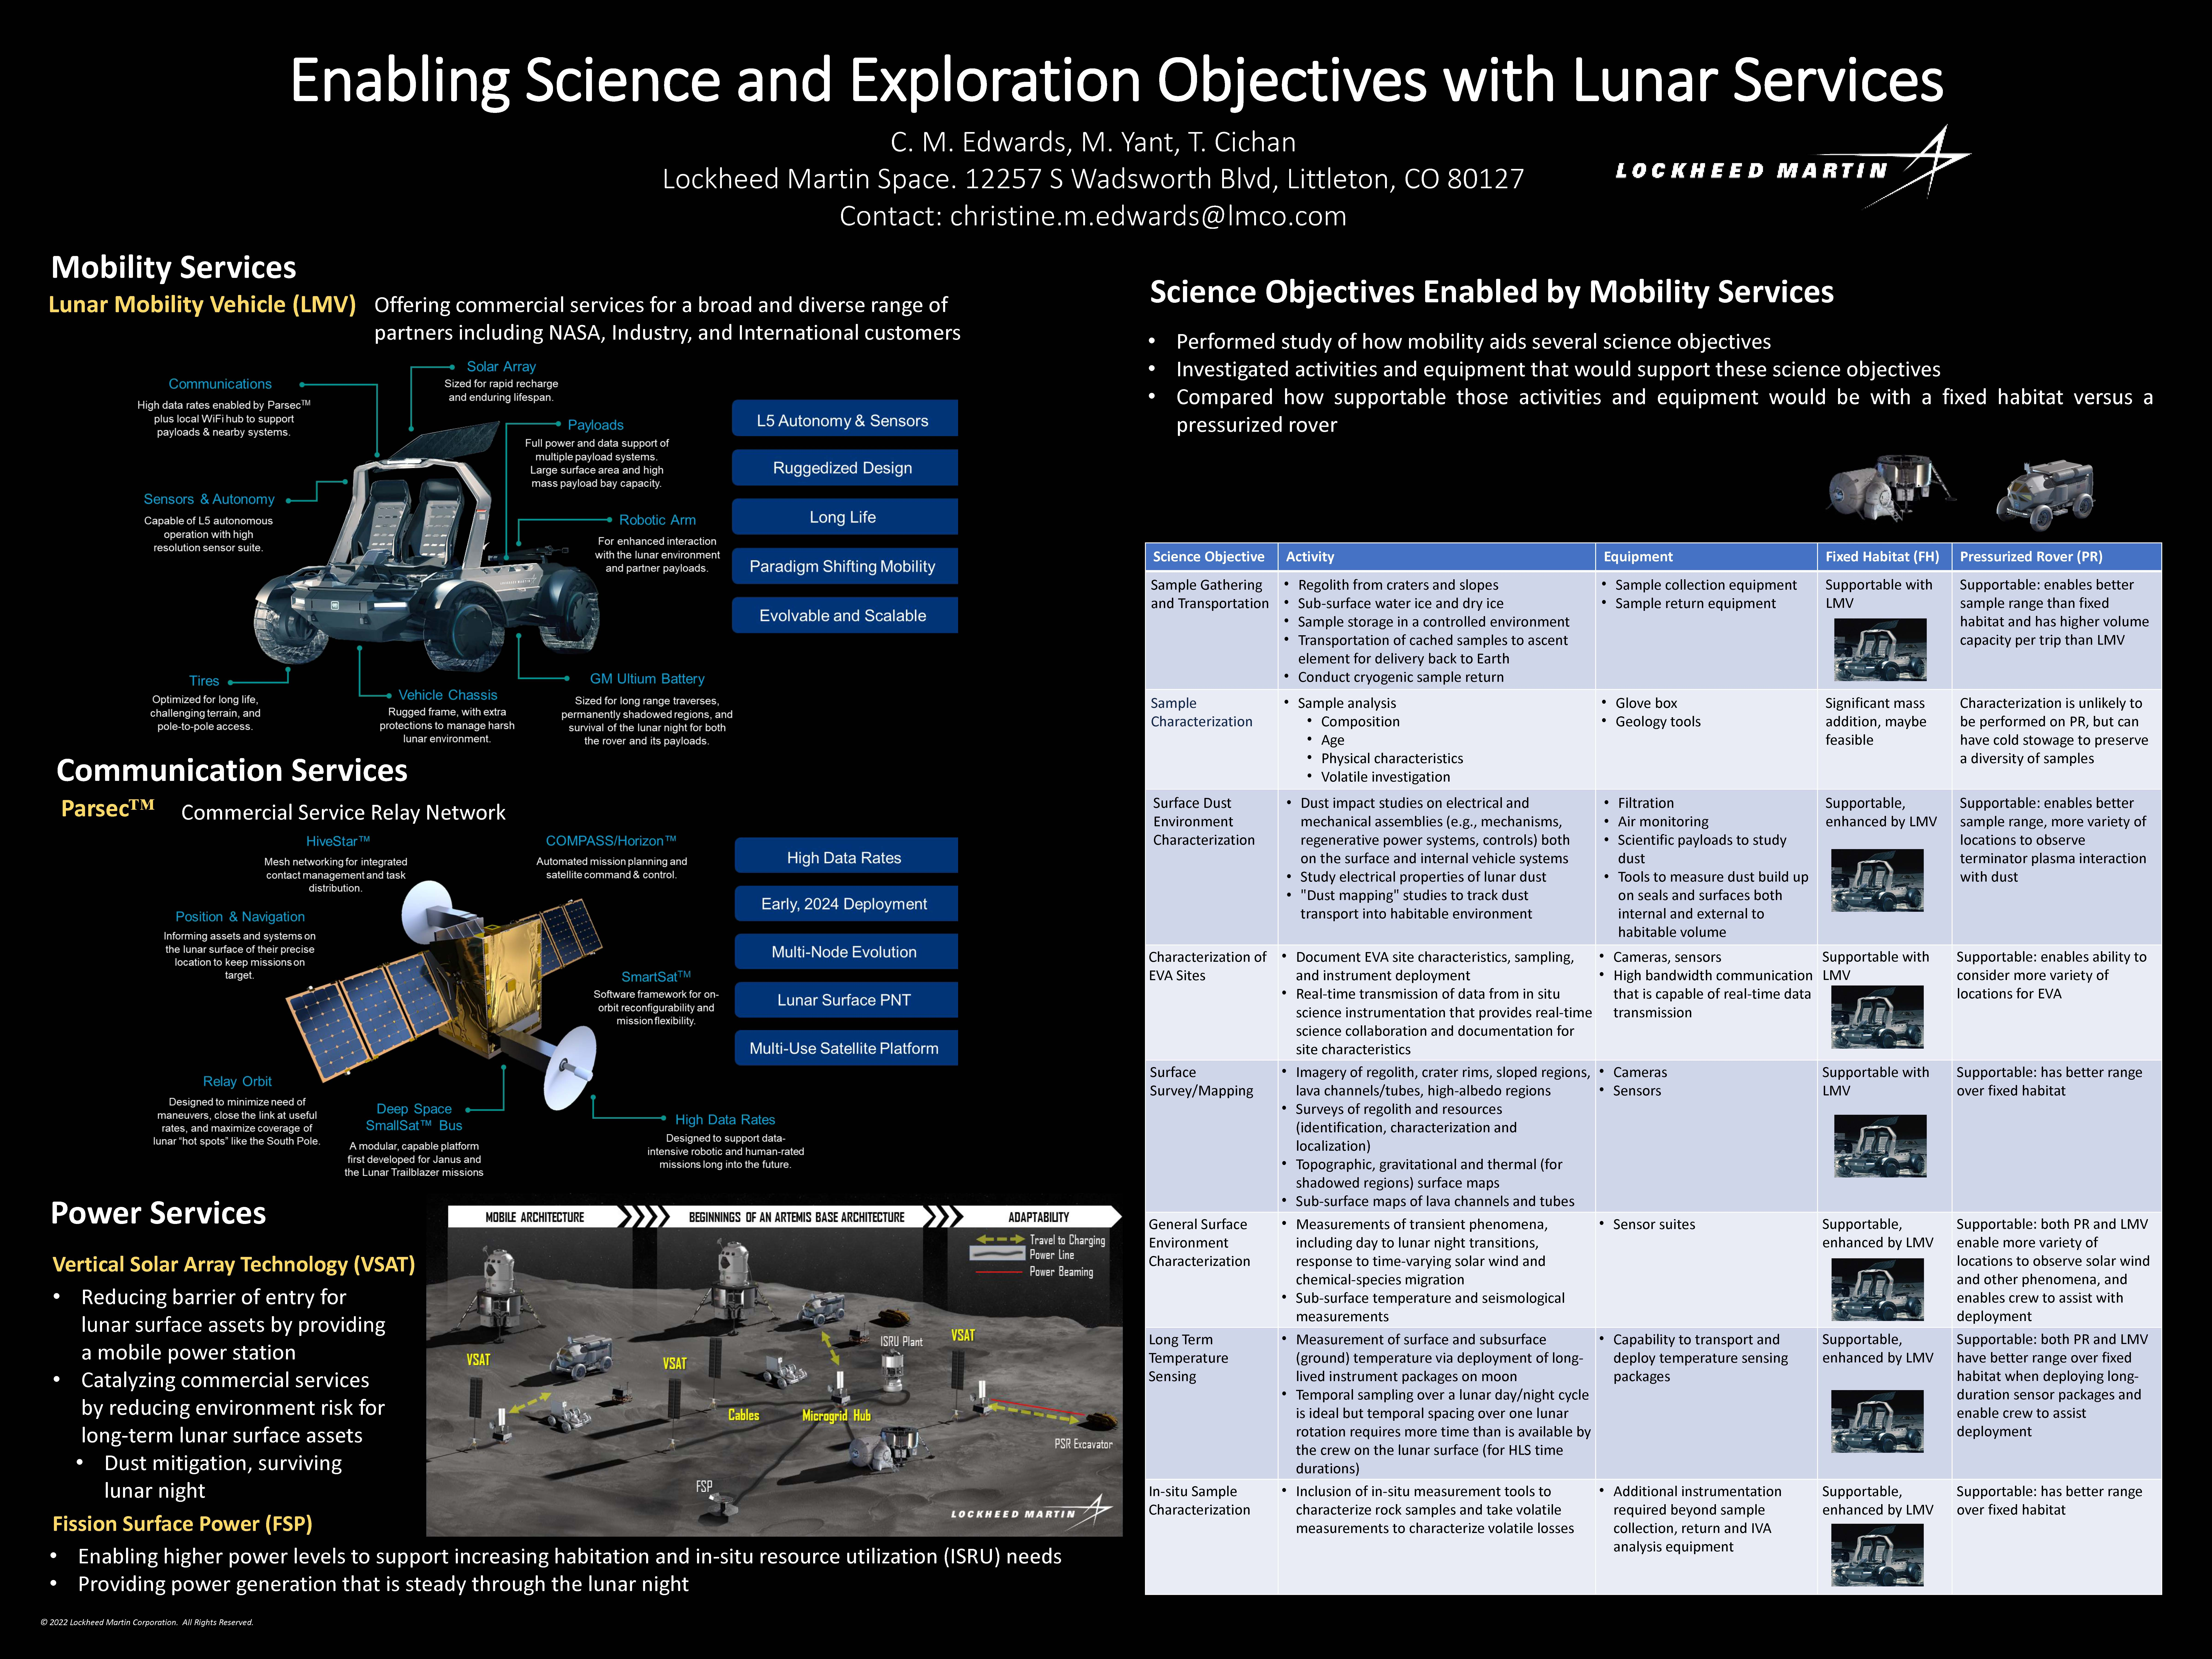 Enabling Science and Exploration Objectives with Lunar Services